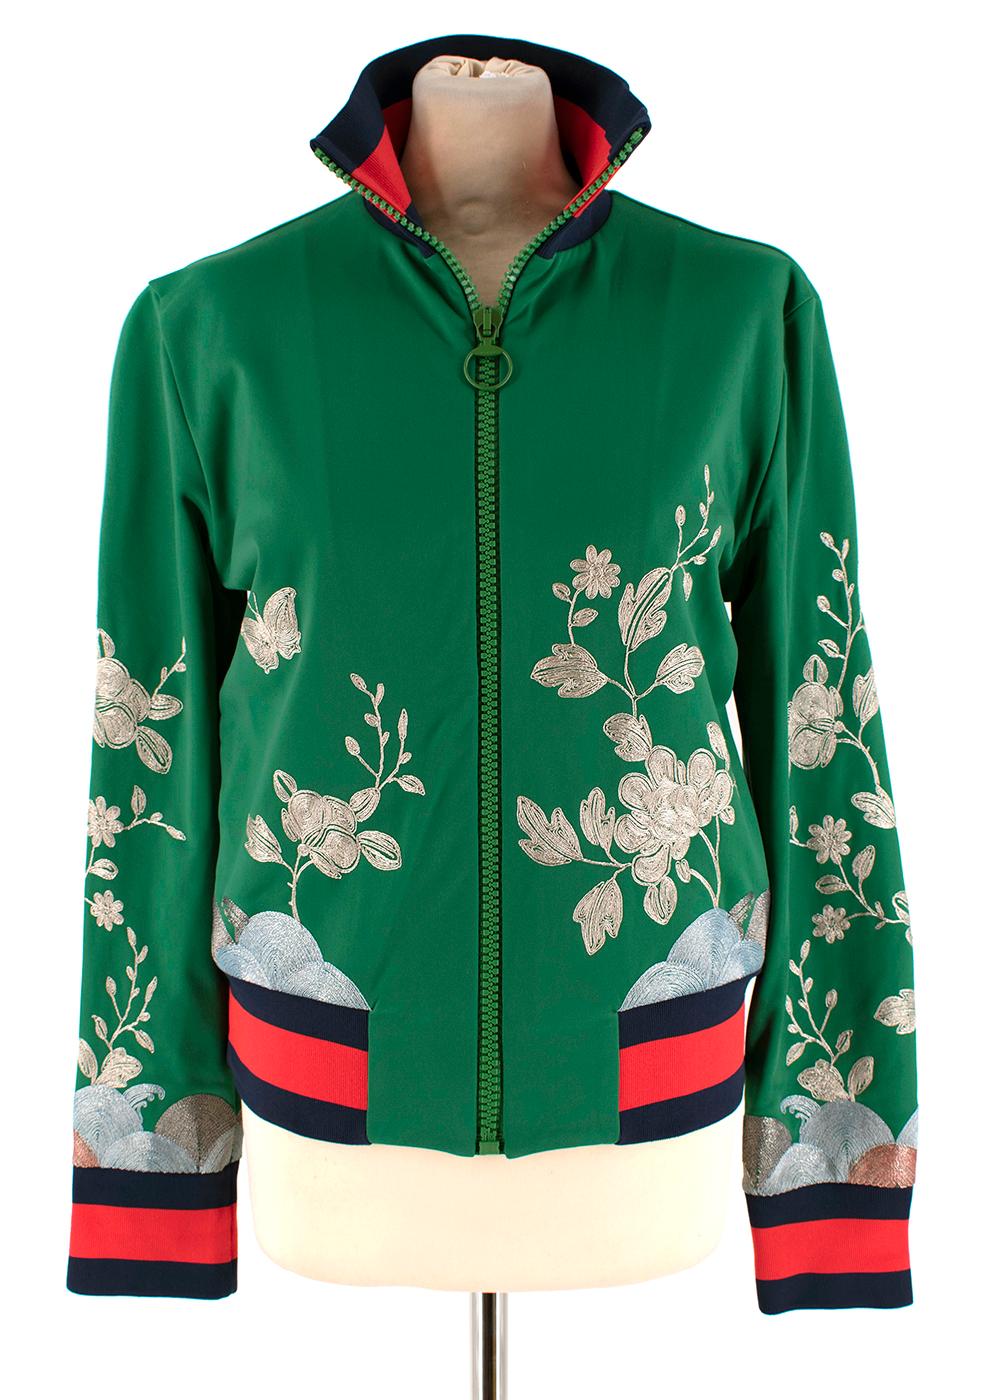 Gucci Floral-embroidered silk-satin bomber jacket

- Apple-green, silk-satin
- Light-gold, pale-blue 
- Orange floral-embroidered
- Round neck, long sleeves
- Front pockets

Made In Italy 

Length - 55cm
Chest - 38cm
Sleeve - 60cm